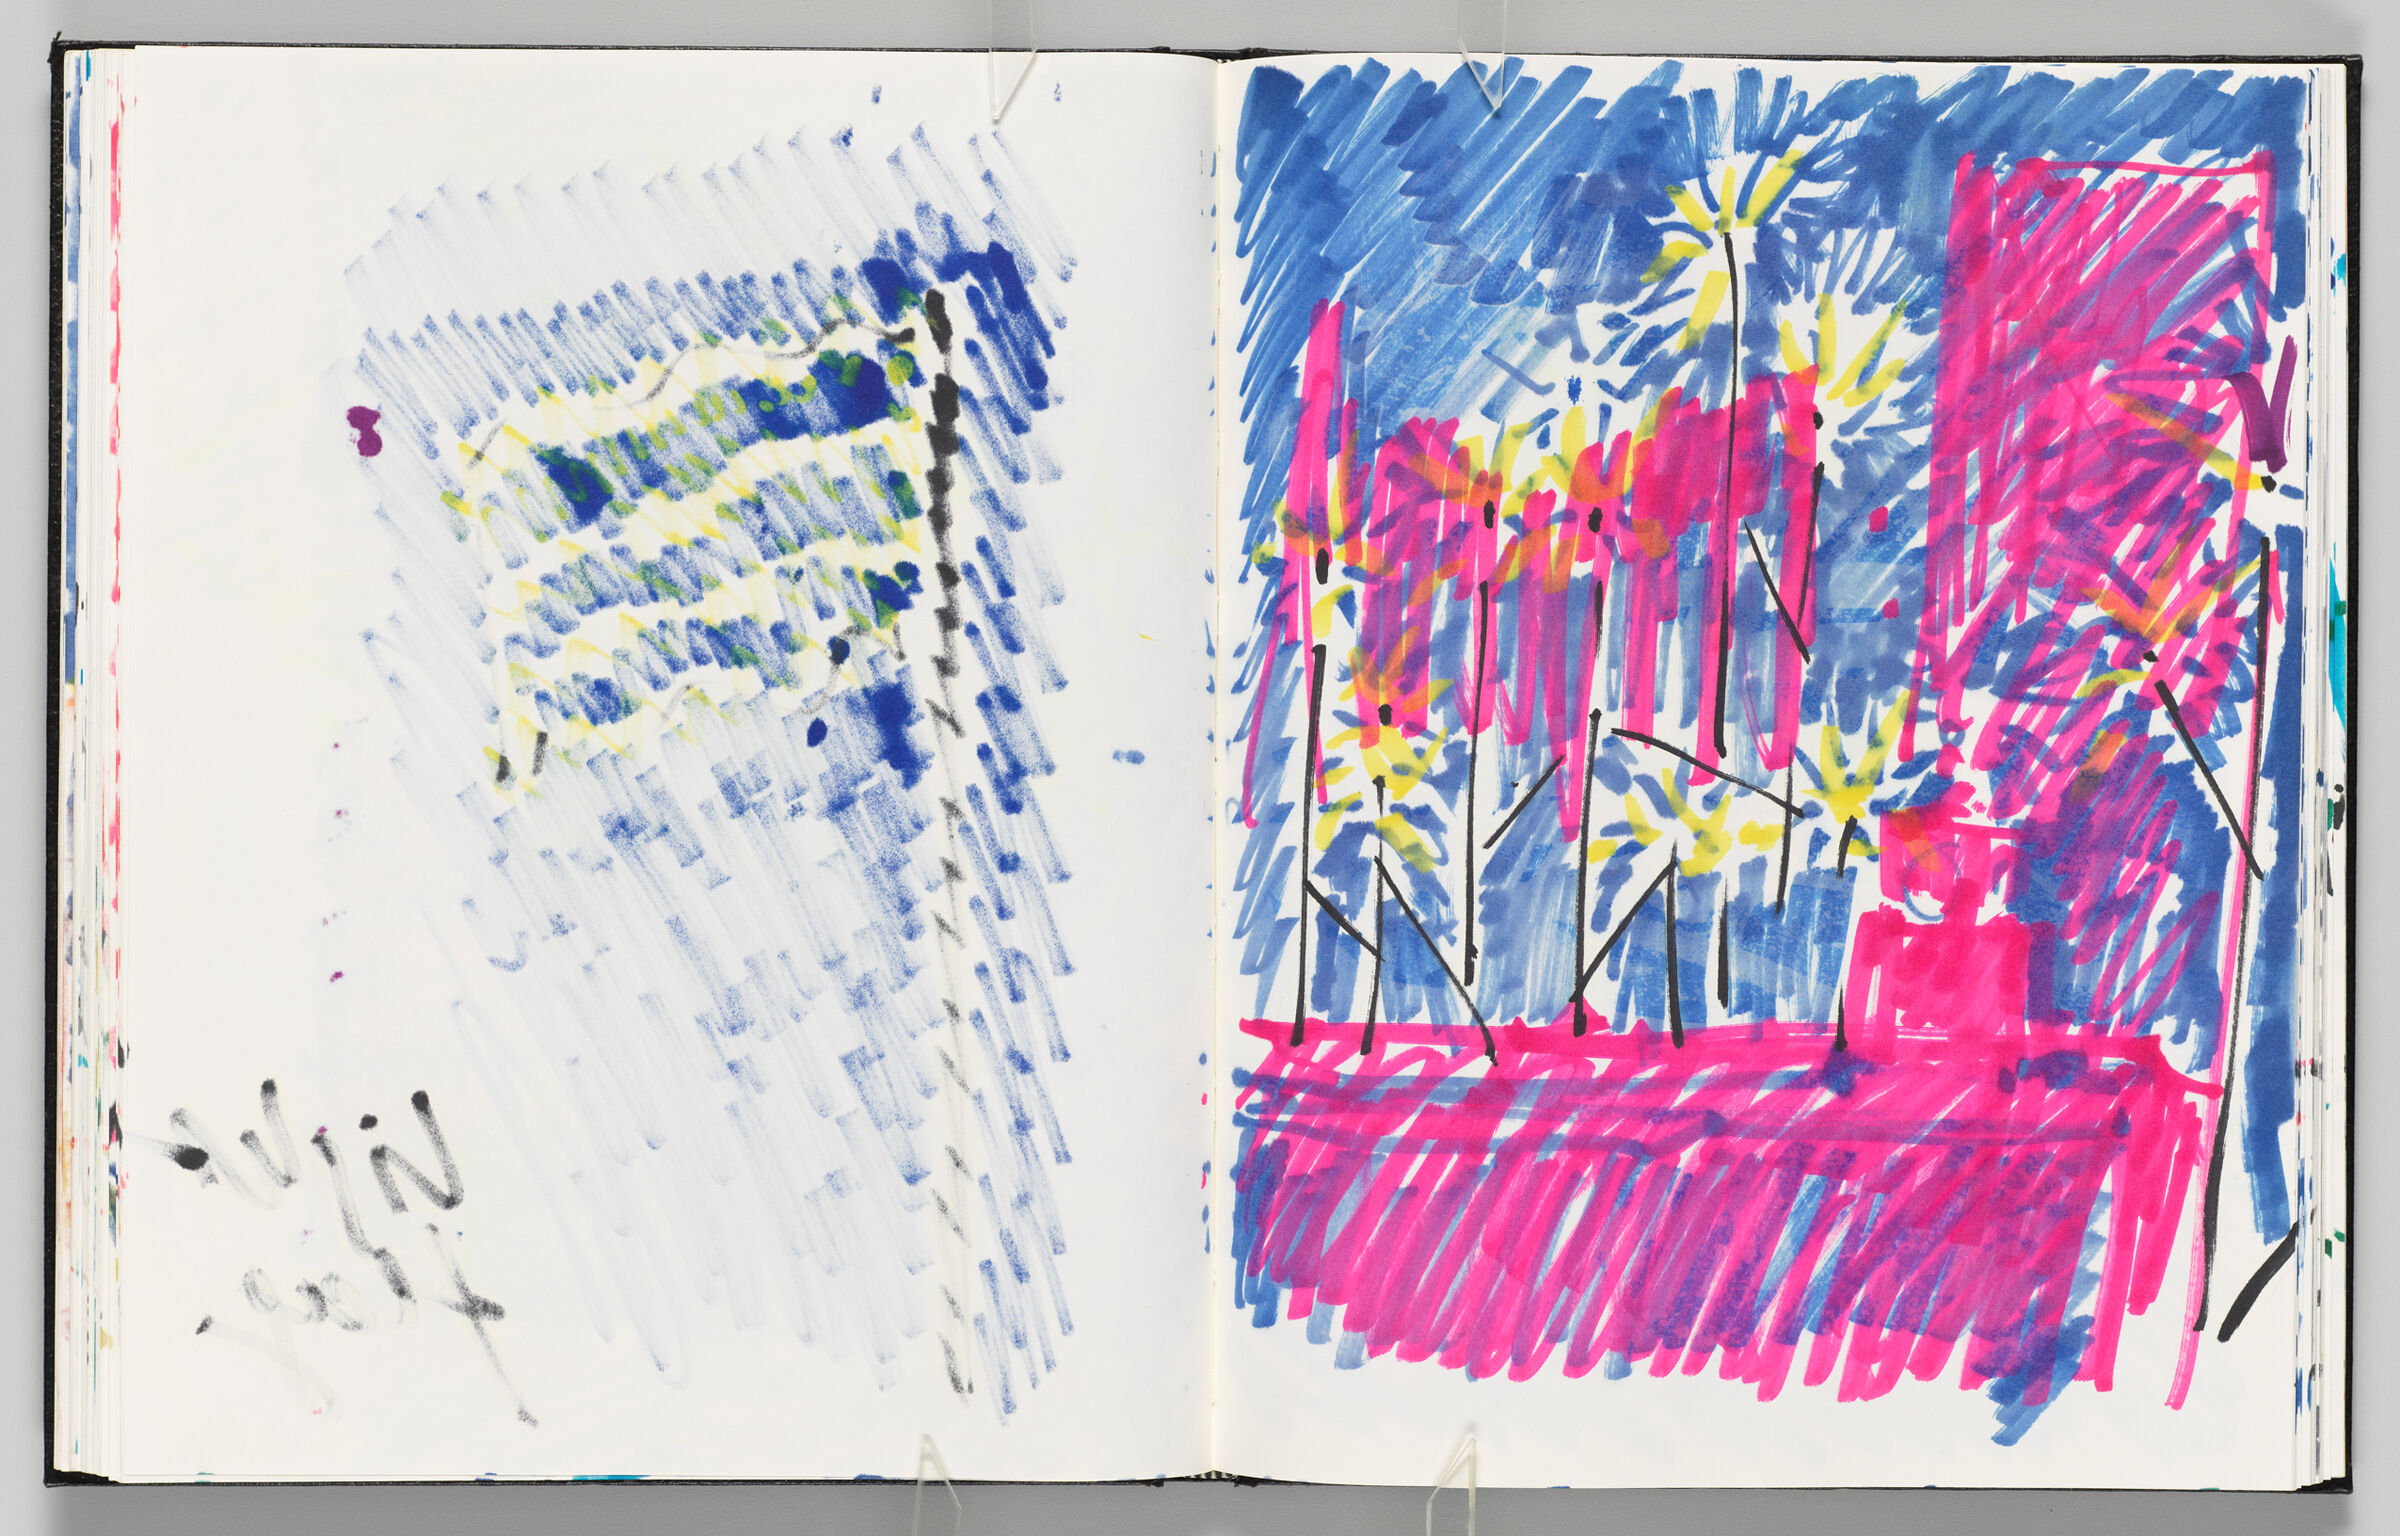 Untitled (Bleed-Through Of Previous Page, Left Page); Untitled (Light Work Design, Right Page)